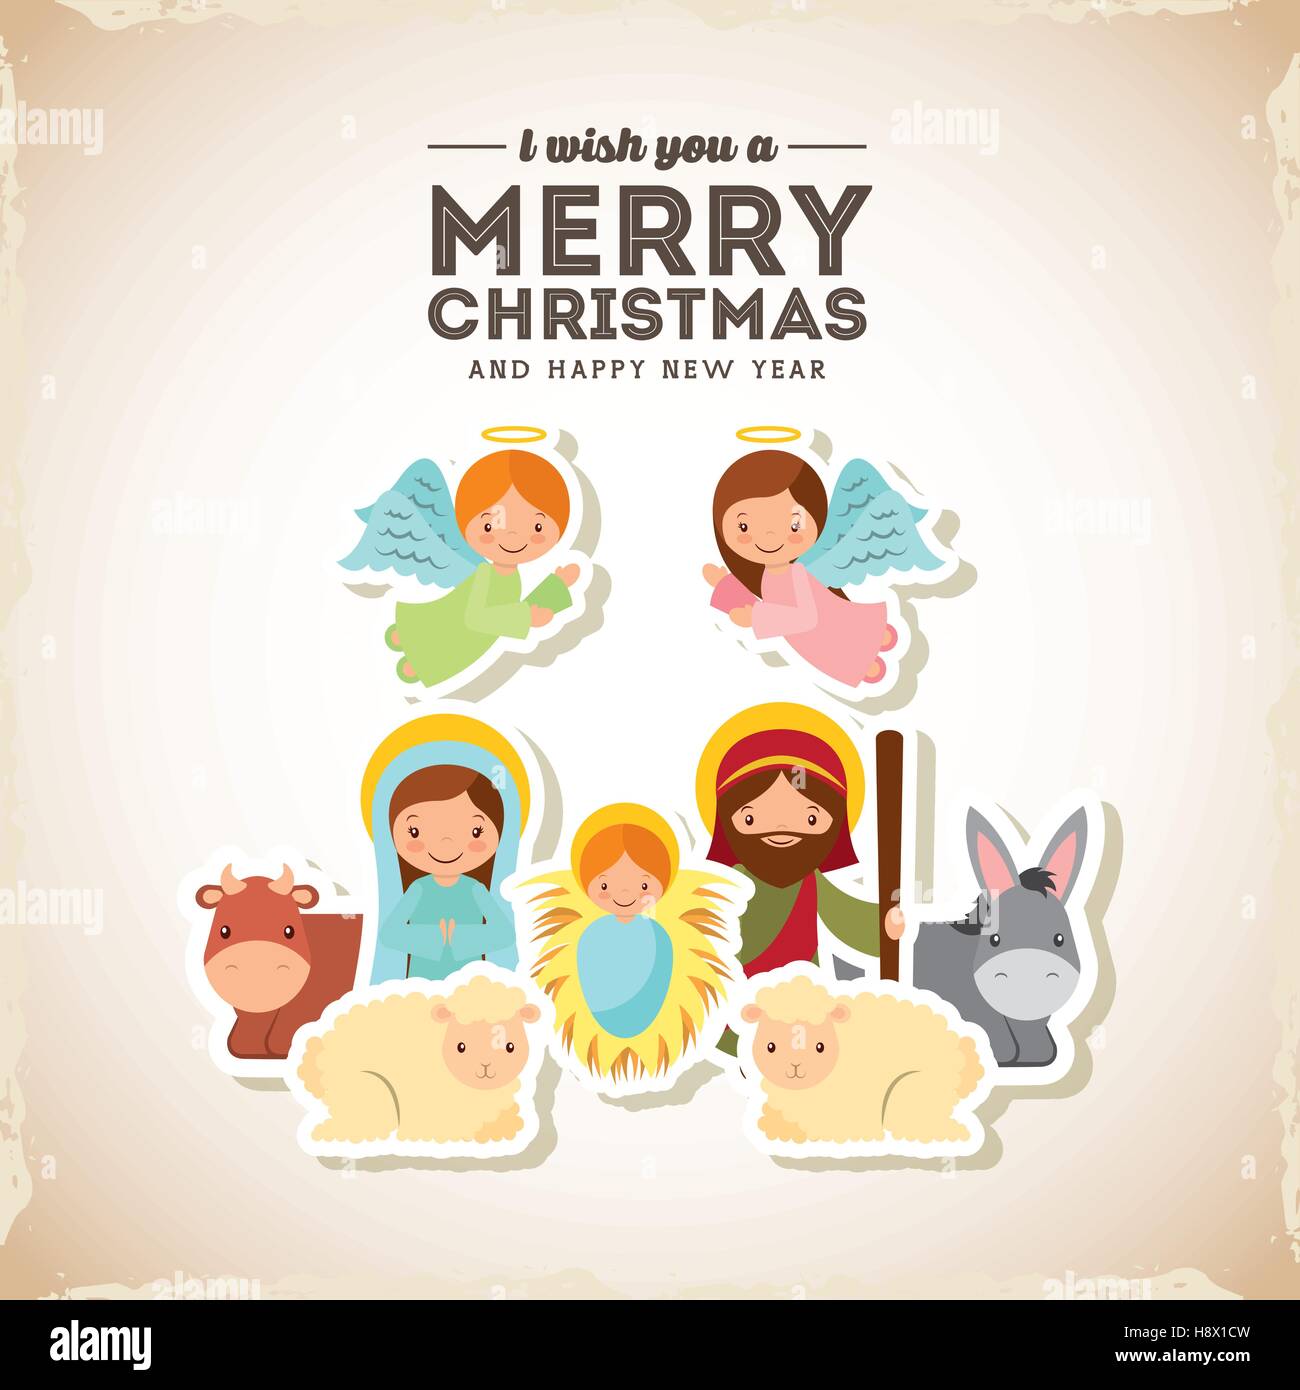 holy family manger scene merry christmas and happy new year card colorful design vector